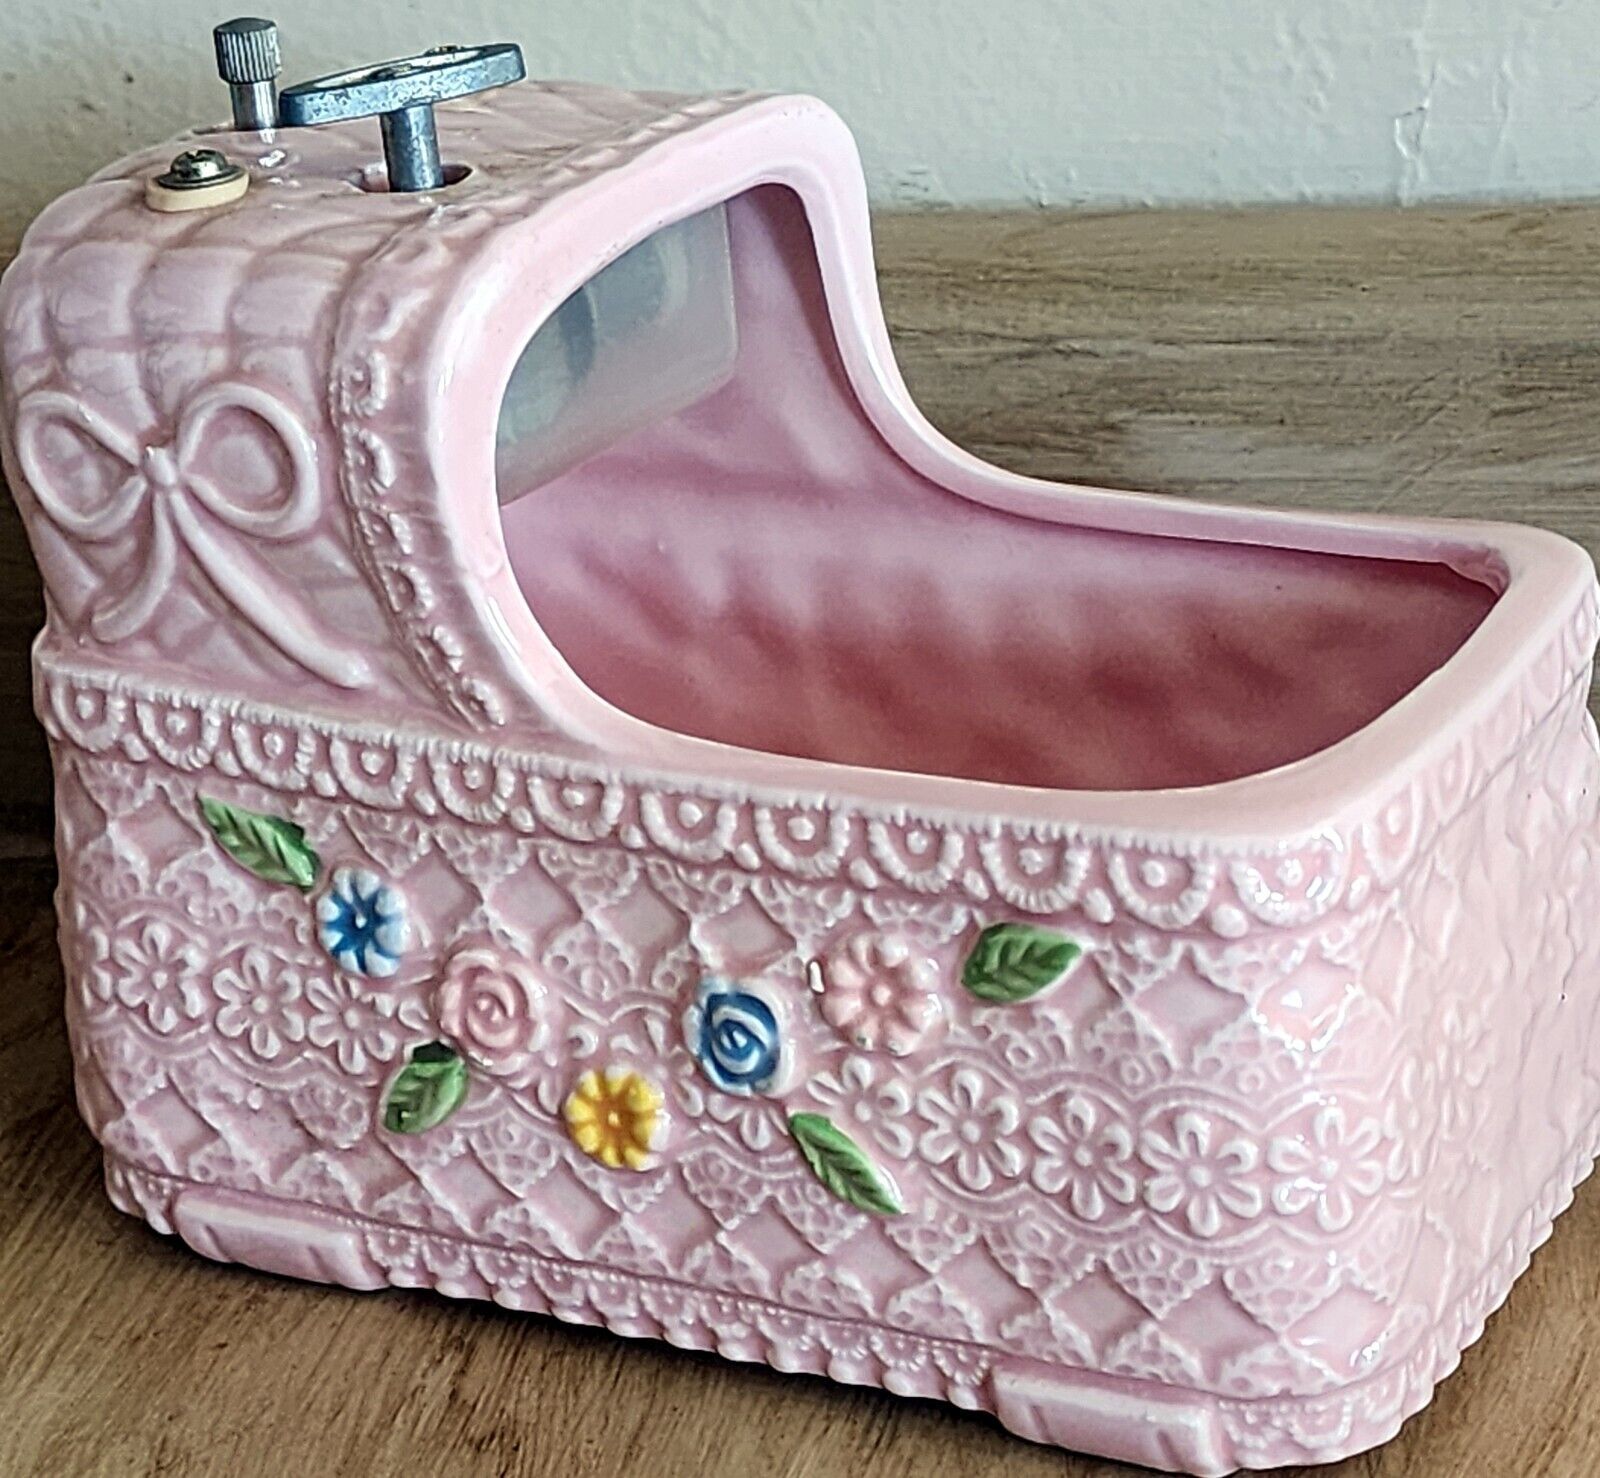 Napco Pink Bassinet Music Box Rock A Bye Baby Nursery Hand Painted Ceramic - $11.69